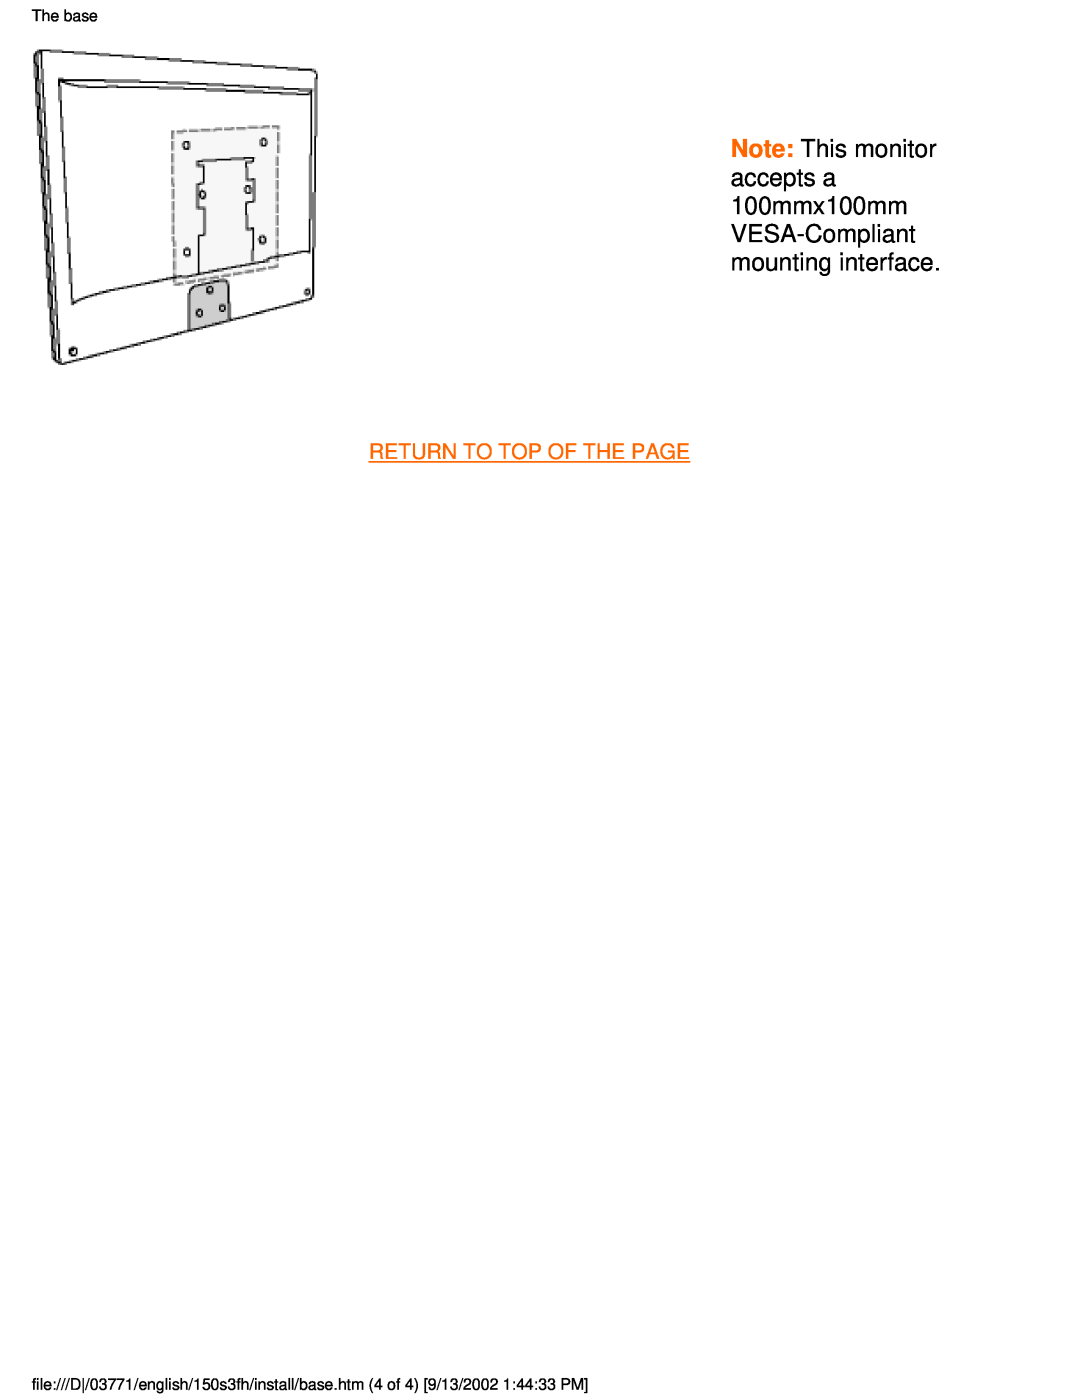 Philips 150S3H user manual Return To Top Of The Page, The base 